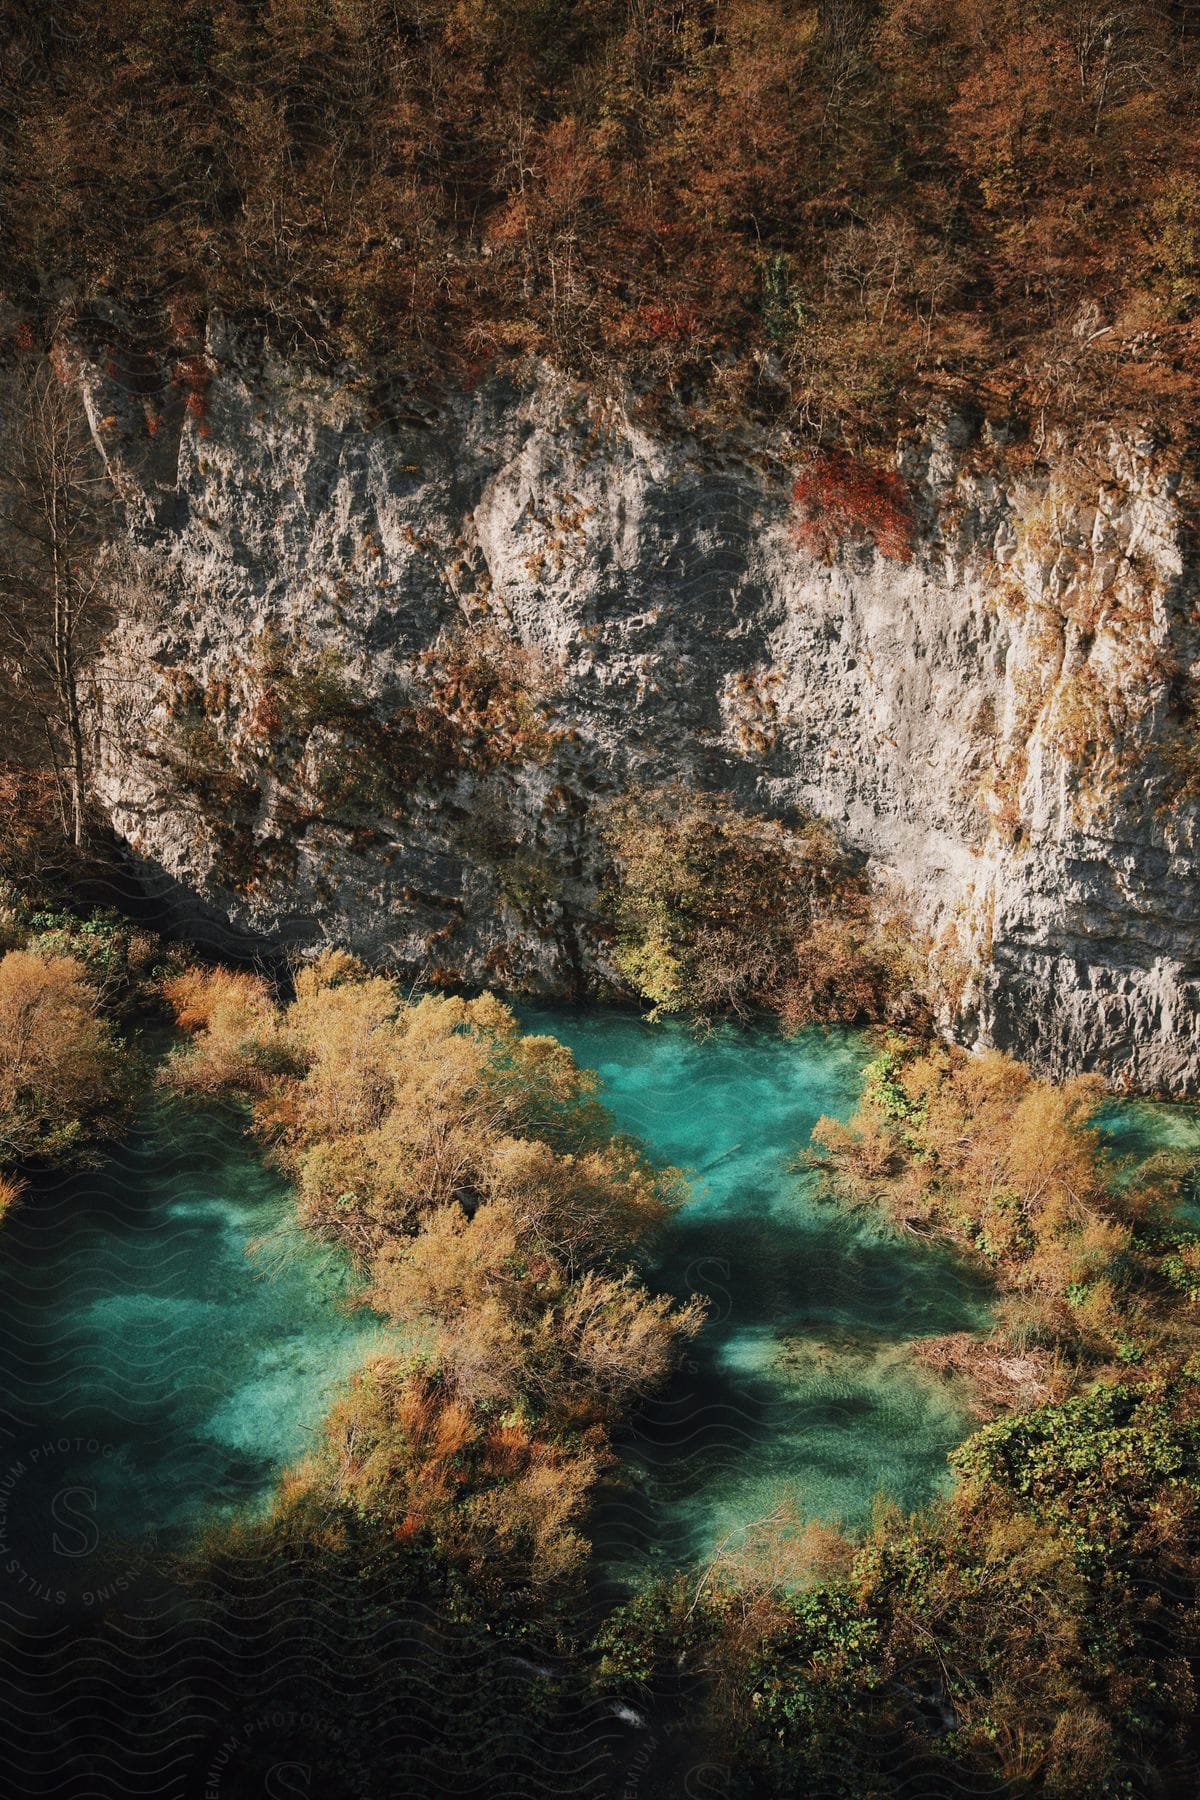 A light blue lake nestled in front of a rocky cliff, surrounded by an autumn forest